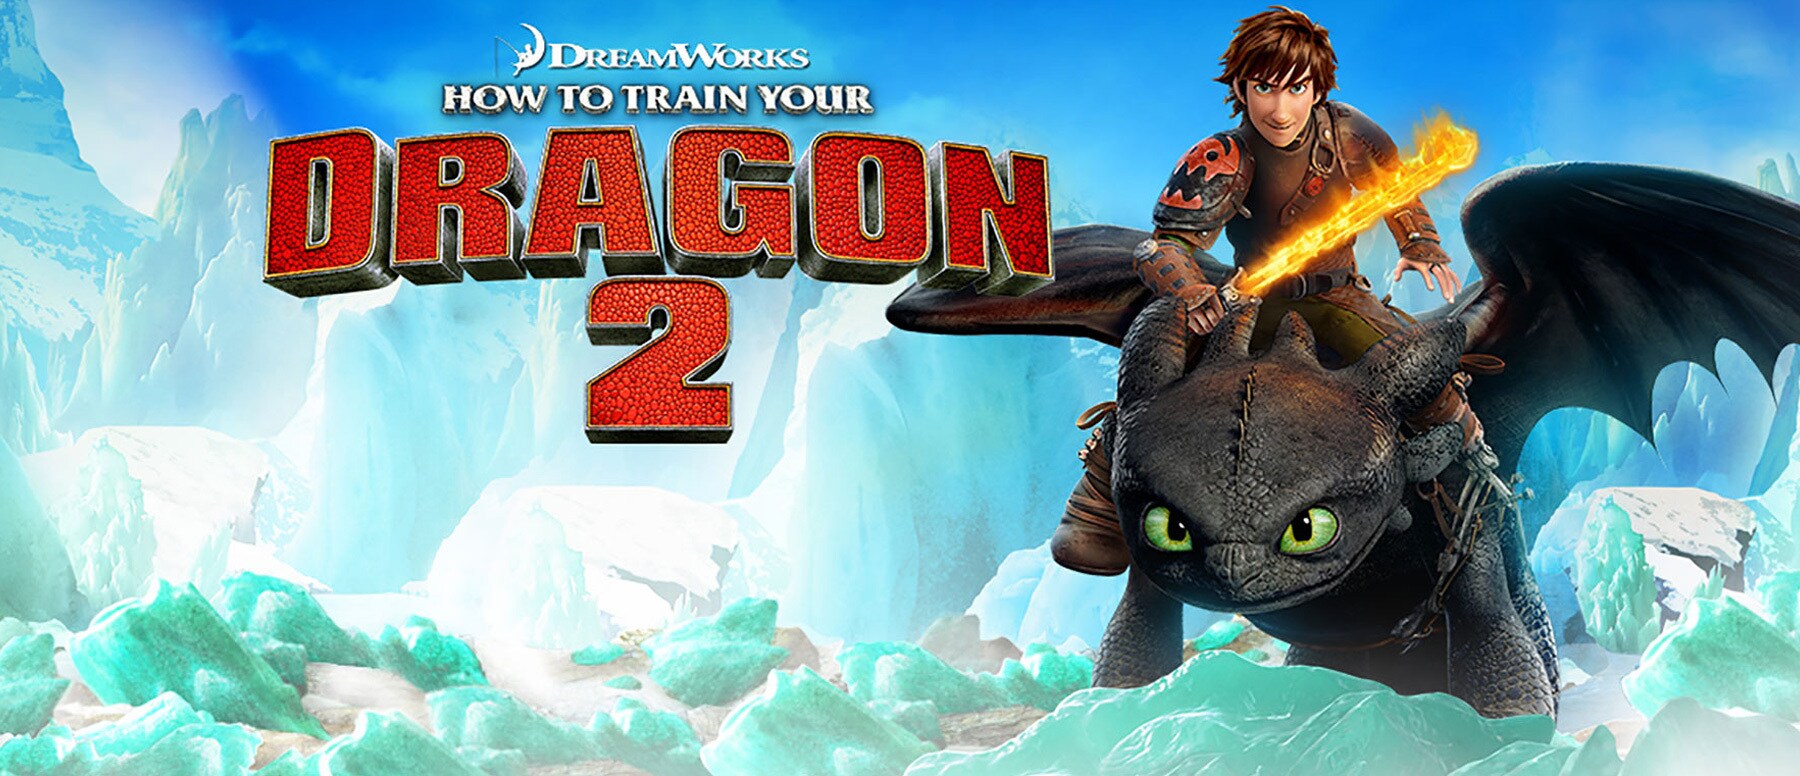 How to Train Your Dragon 2 Hero